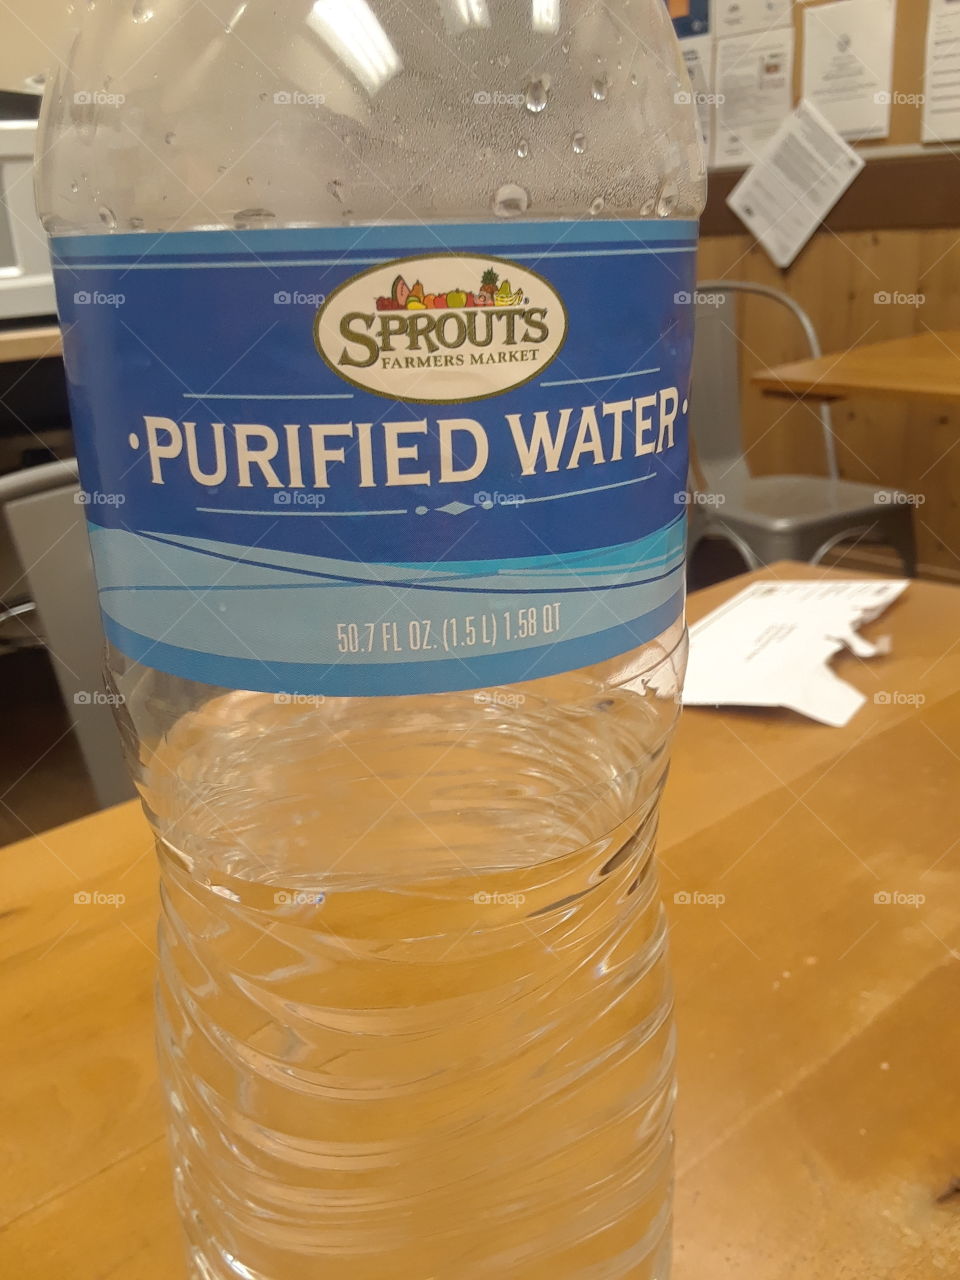 pur drinking water.healthy living and great taste.sprouts water is pretty nice.Basketball and water go together. $1 for a large water which is a fine deal.